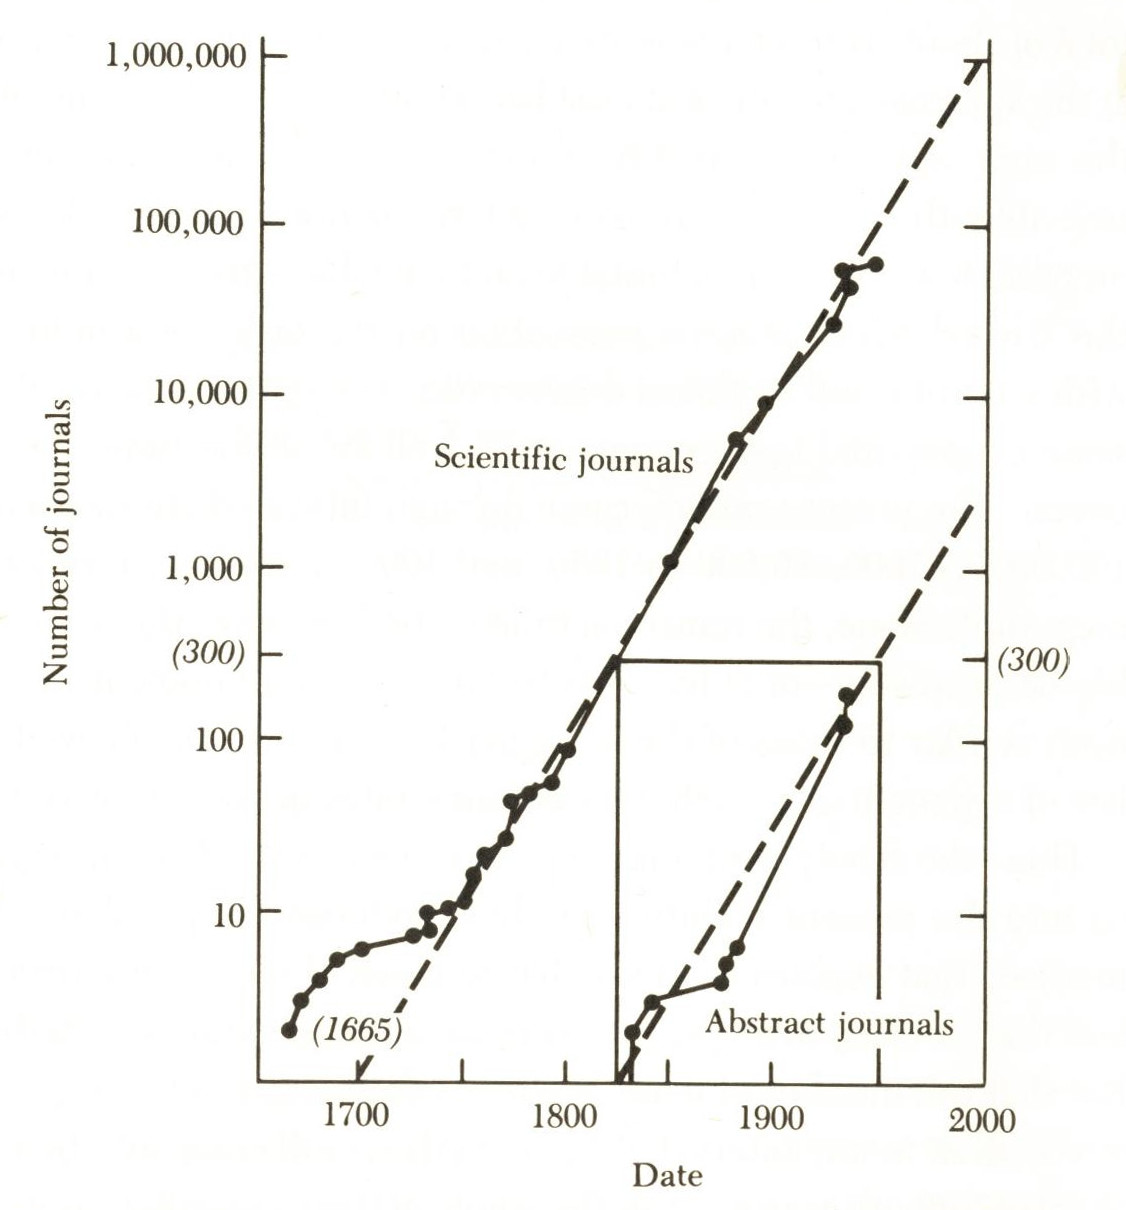 The rise of the number of journals